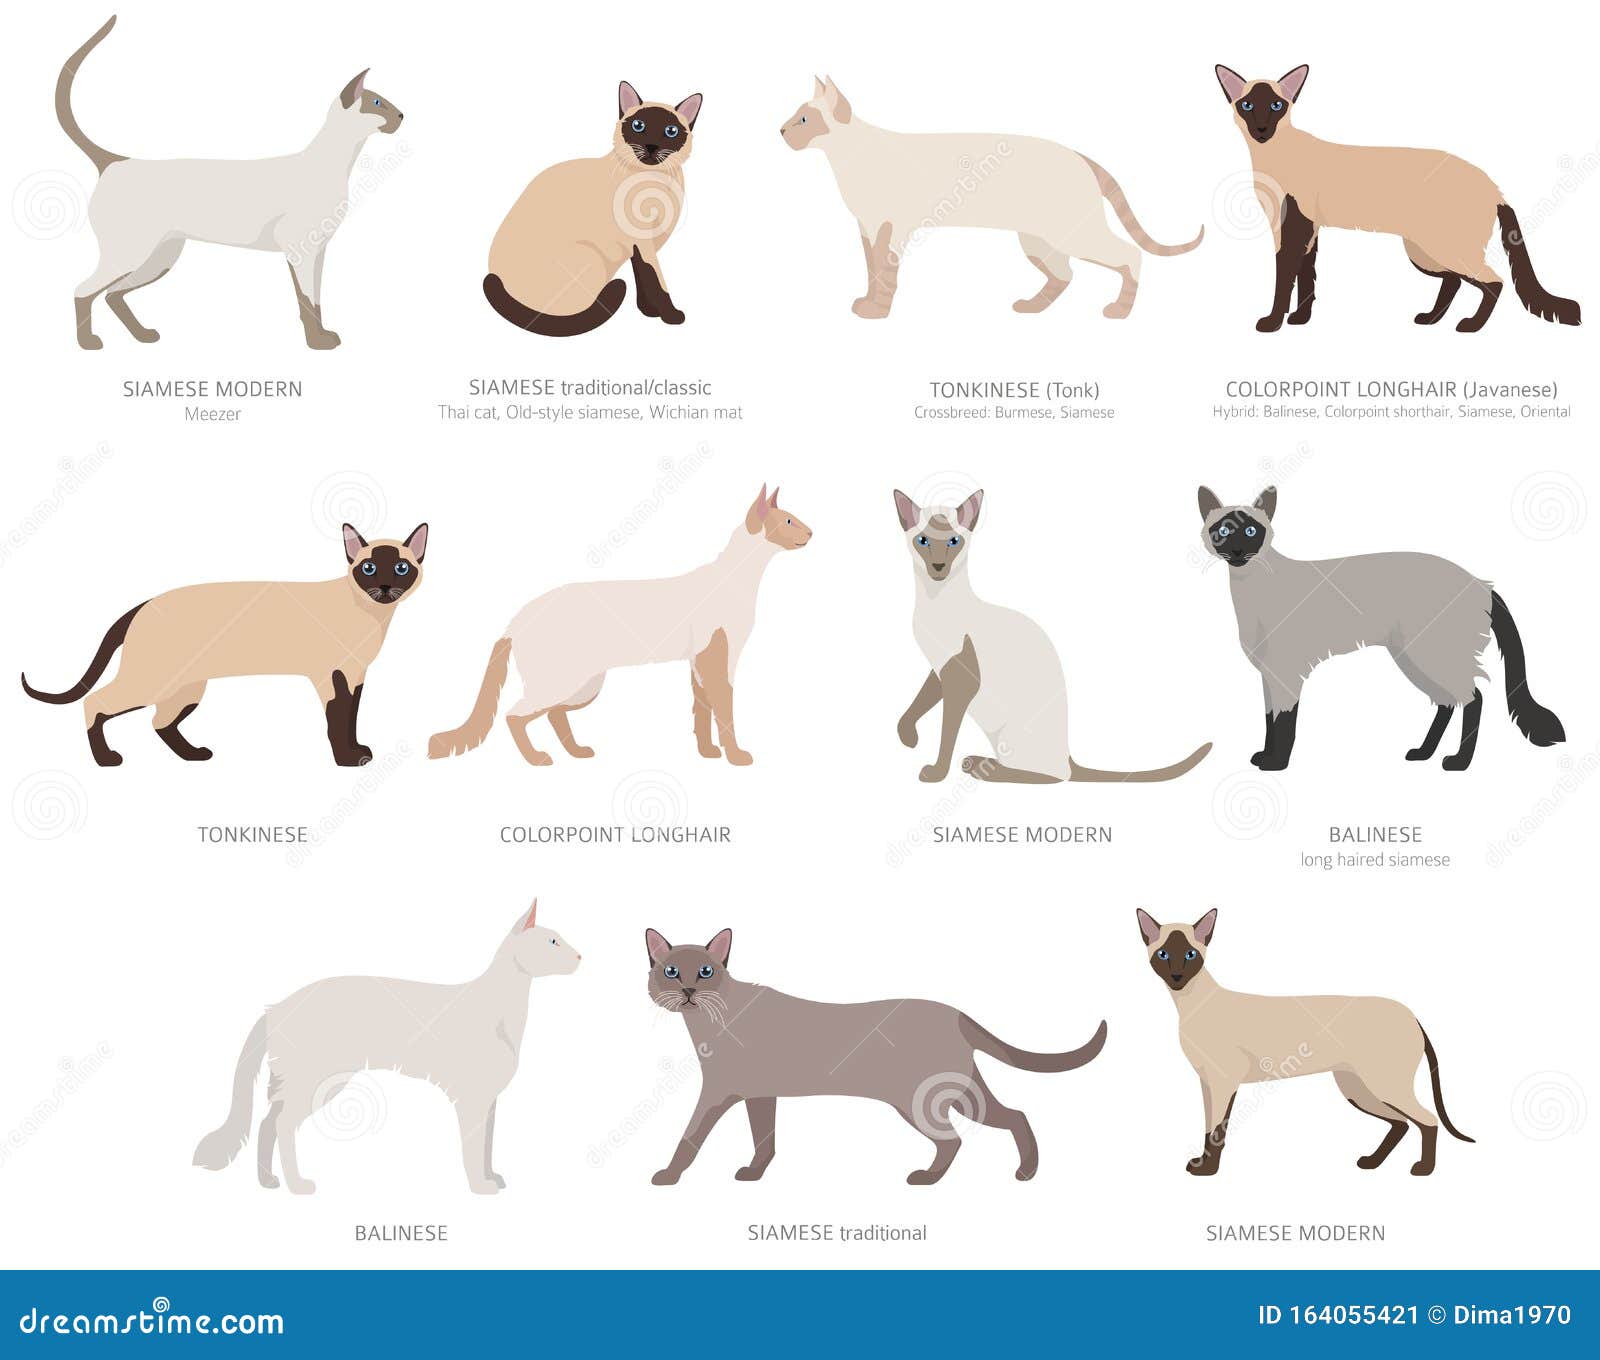 Siamese Type Cats, Colorpoints. Domestic Cat Breeds and Hybrids